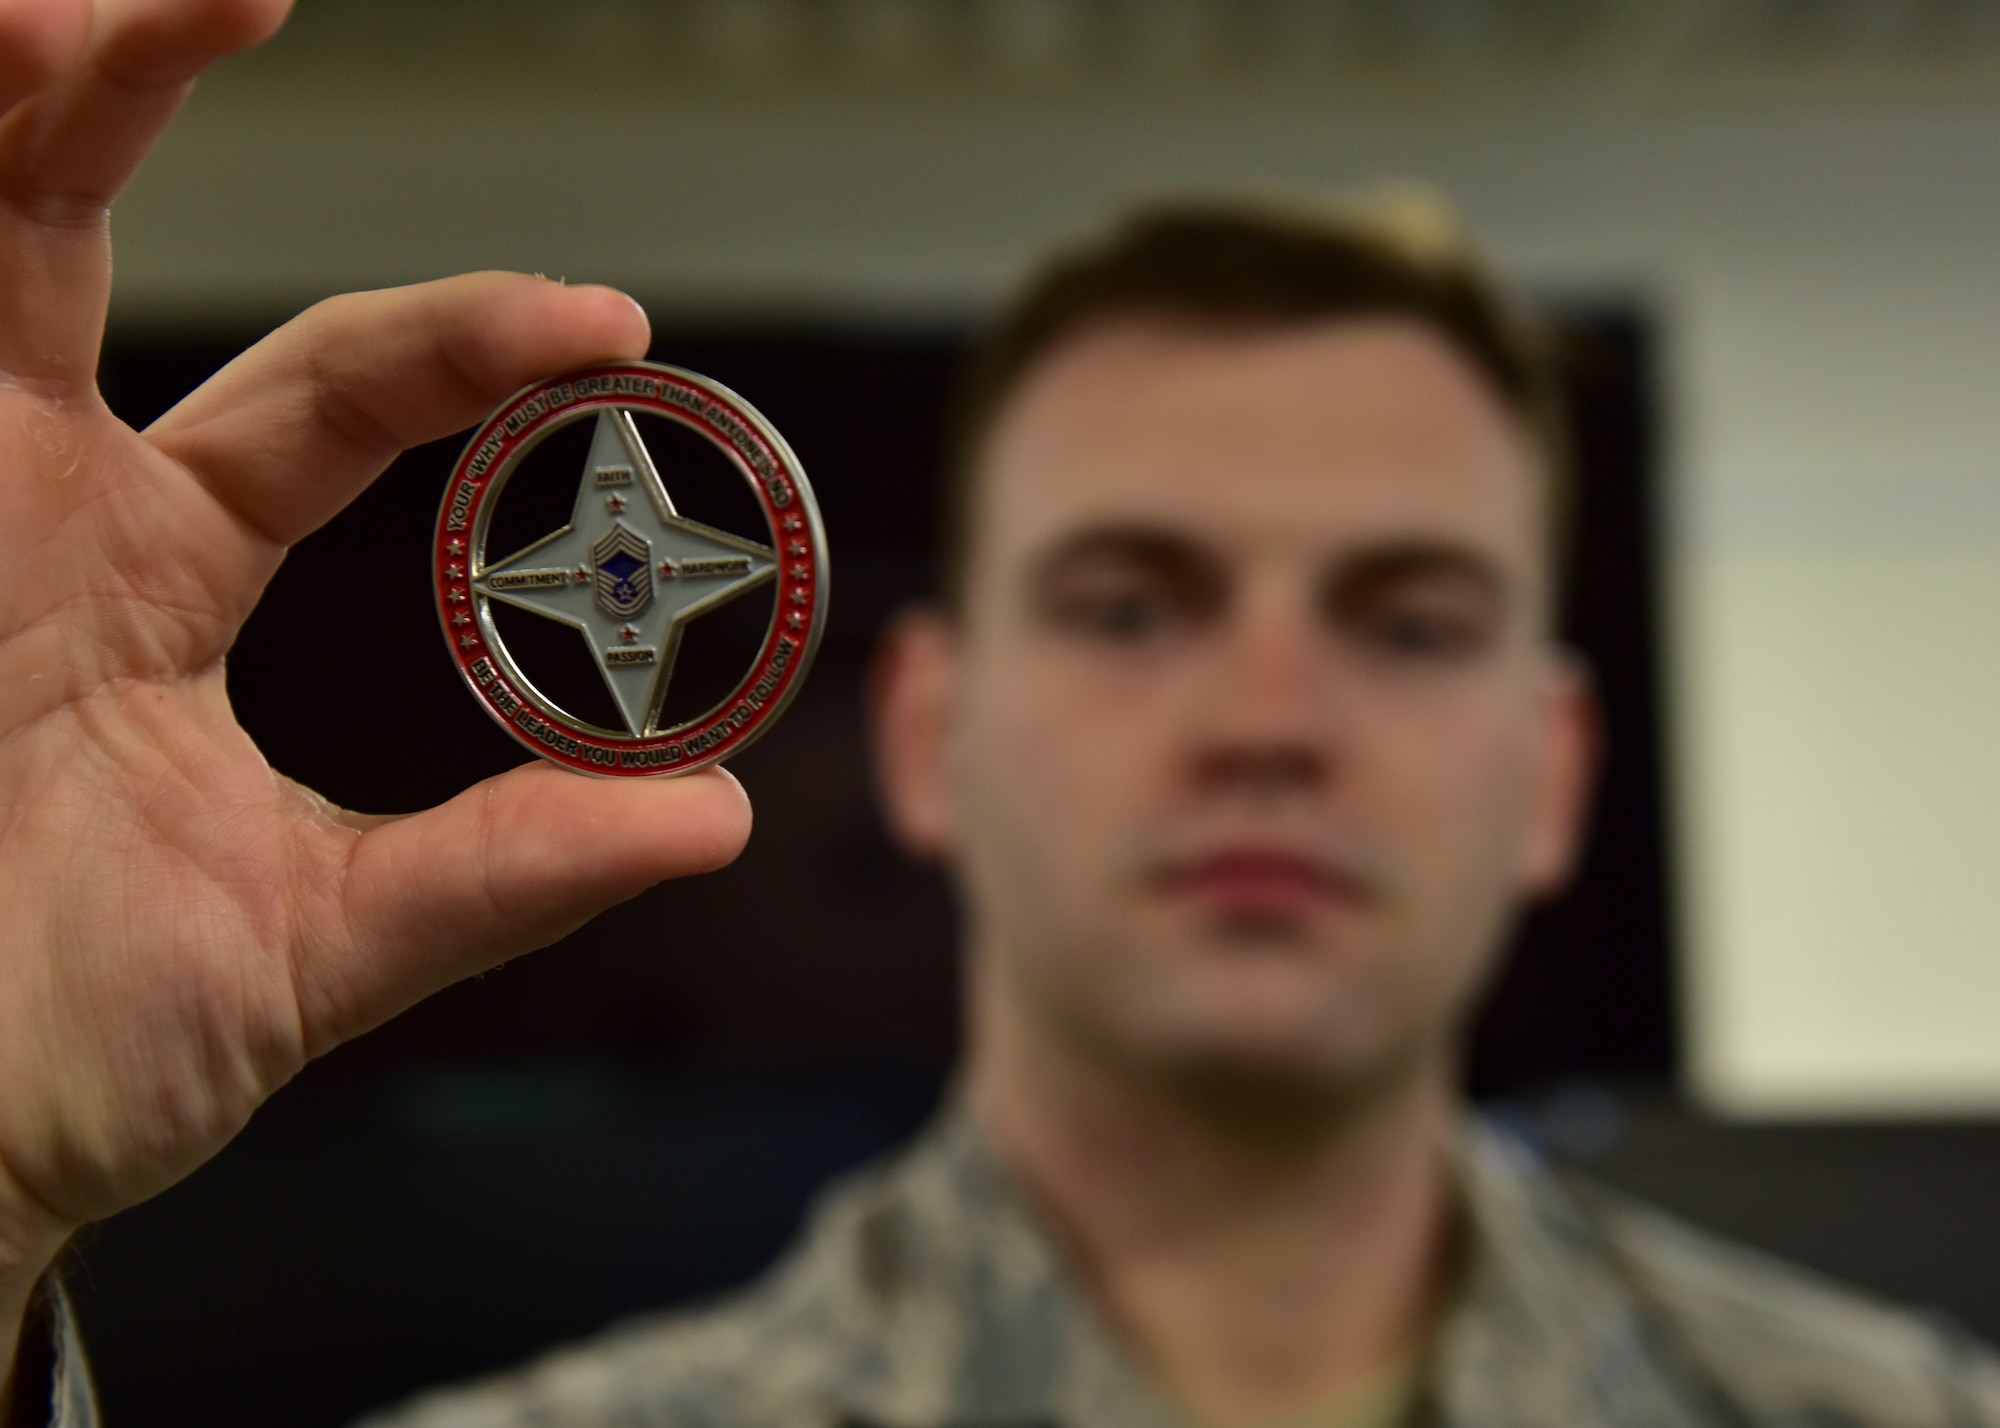 U.S. Air Force Staff Sgt. Brandon Nickell, 8th Intelligence Squadron intelligence analyst, holds a coin presented to him by Chief Master Sgt. James Worrell, 56th Air Communications Squadron superintendent, at Joint Base Pearl Harbor-Hickam, Hawaii, Feb. 25, 2019. Worrell credits Nickell’s quick response and care with saving his life. (U.S. Air Force photo by Staff Sgt. Eboni Prince)